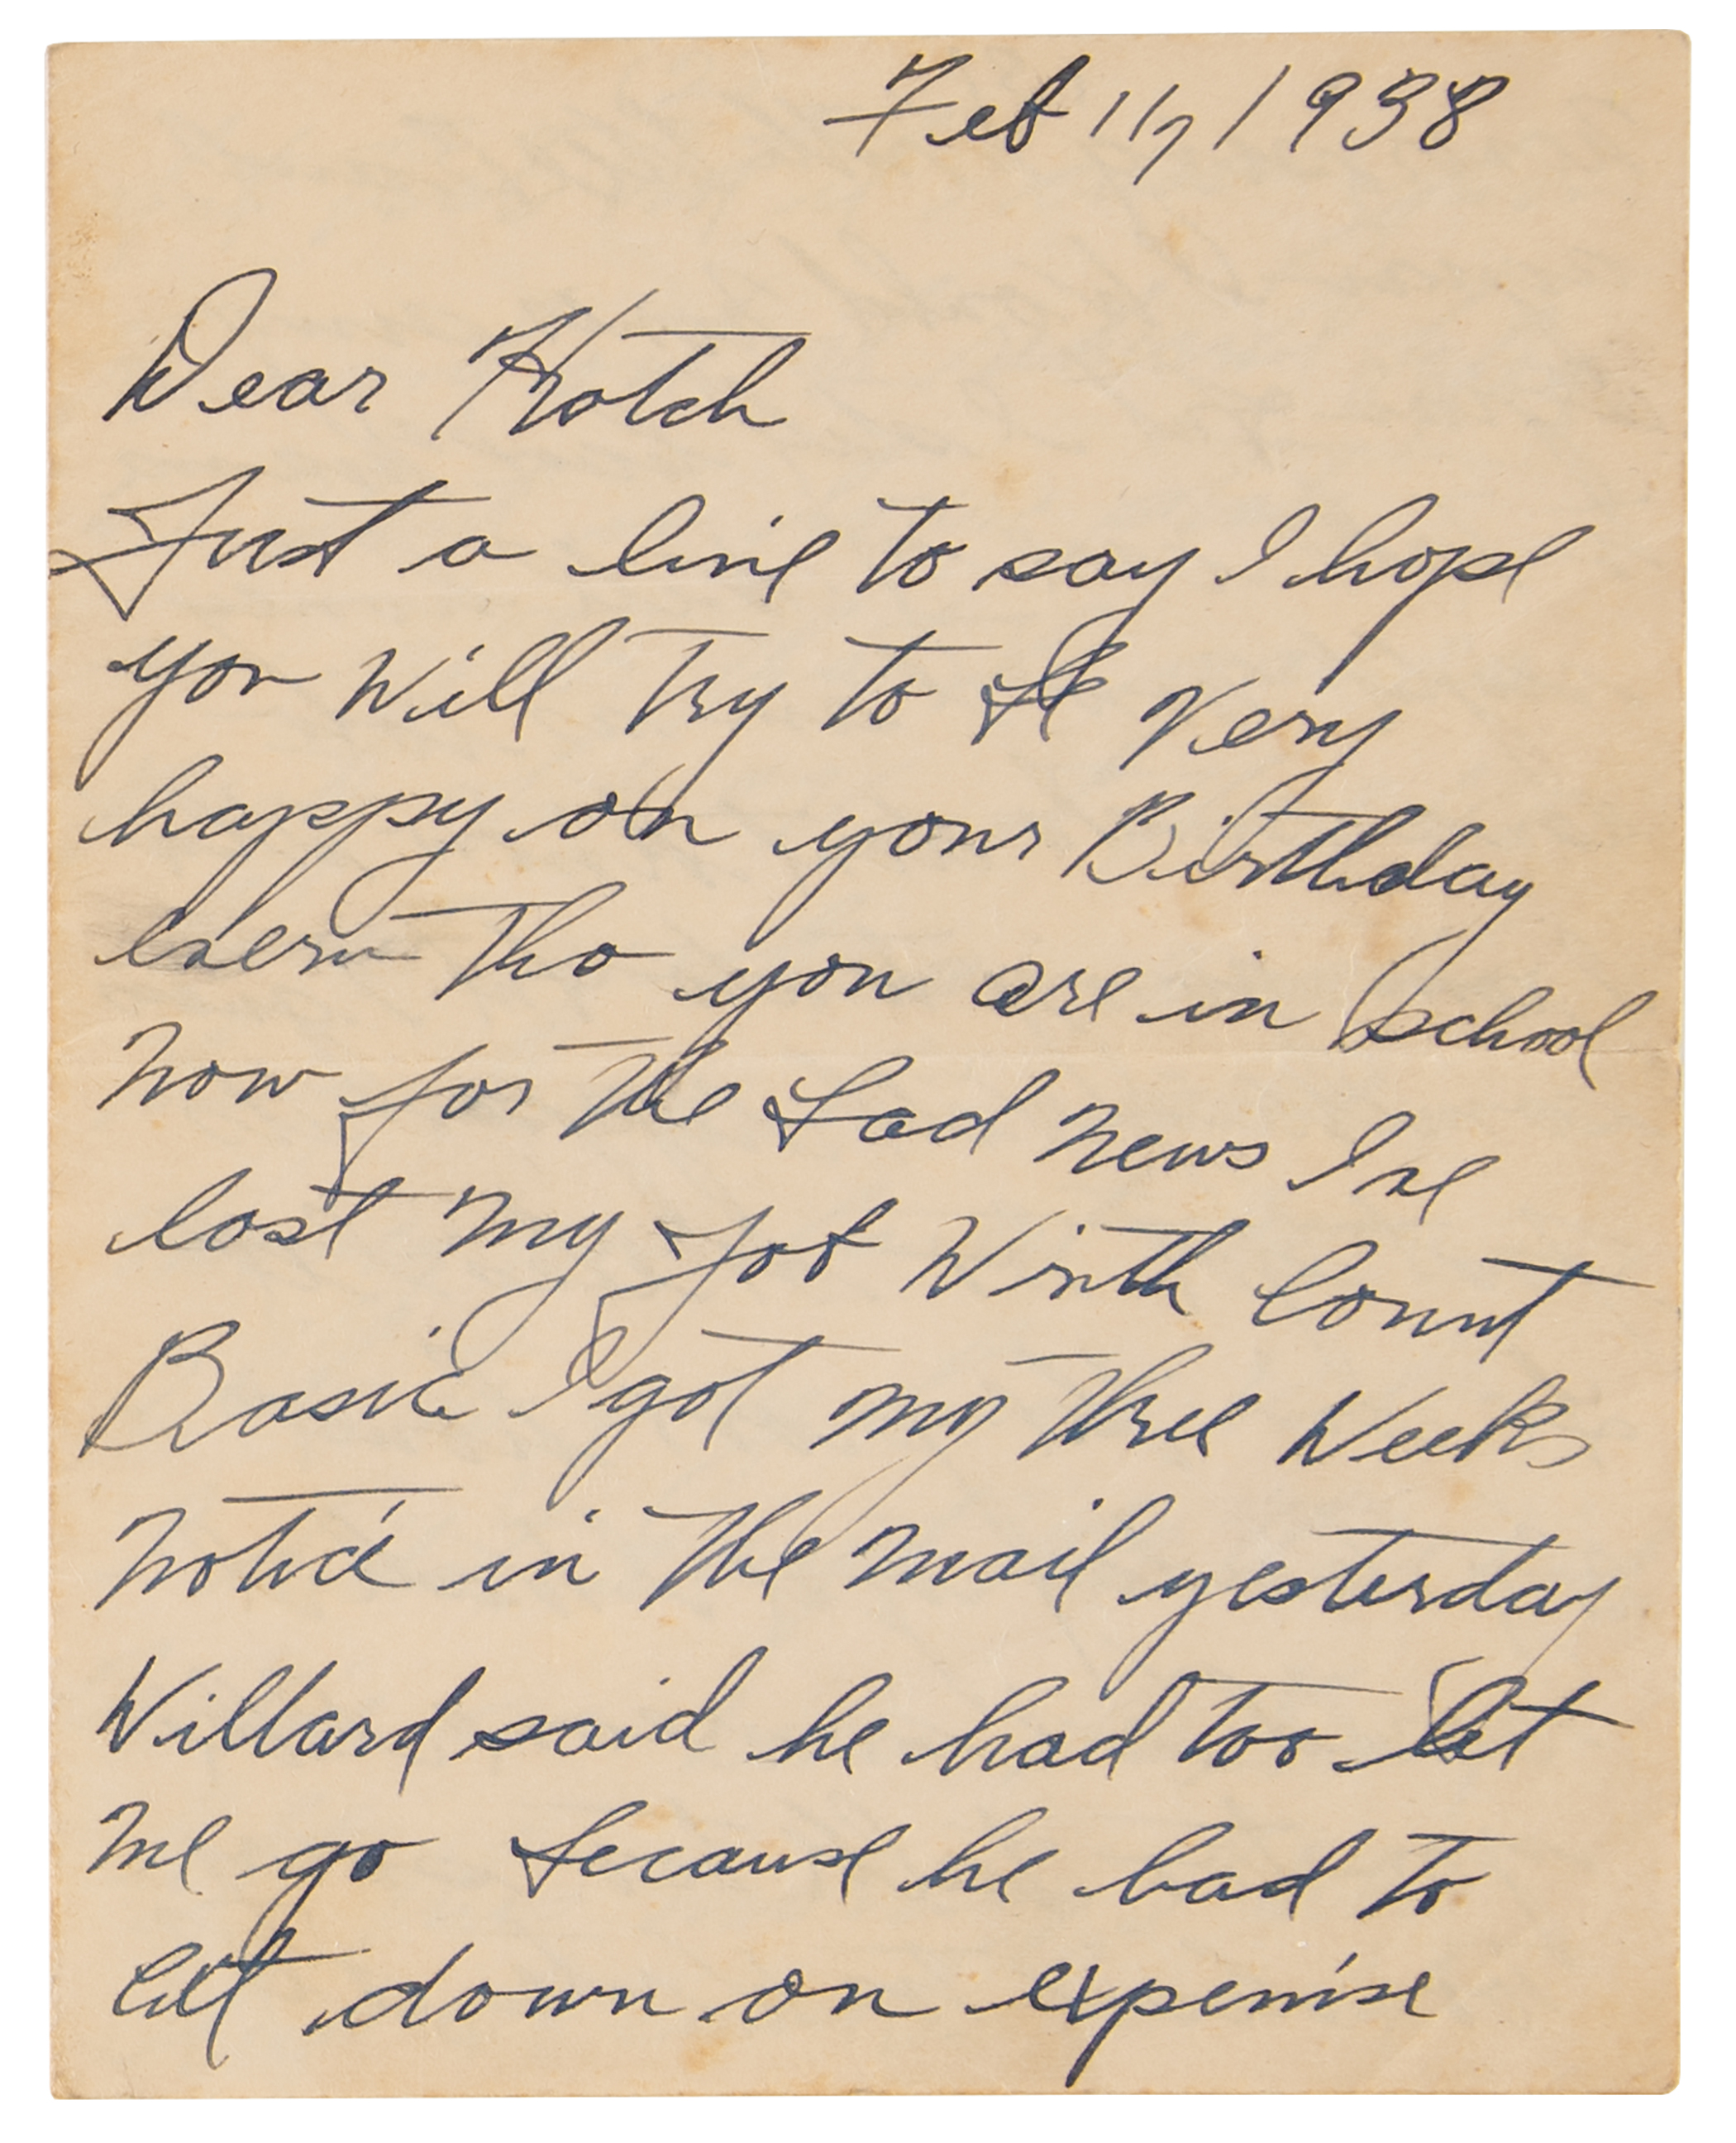 Lot #4039 Billie Holiday Autograph Letter Signed on Being Fired from Count Basie's Band: "I would never sing again, but I still have Mama to take care of" - Image 2